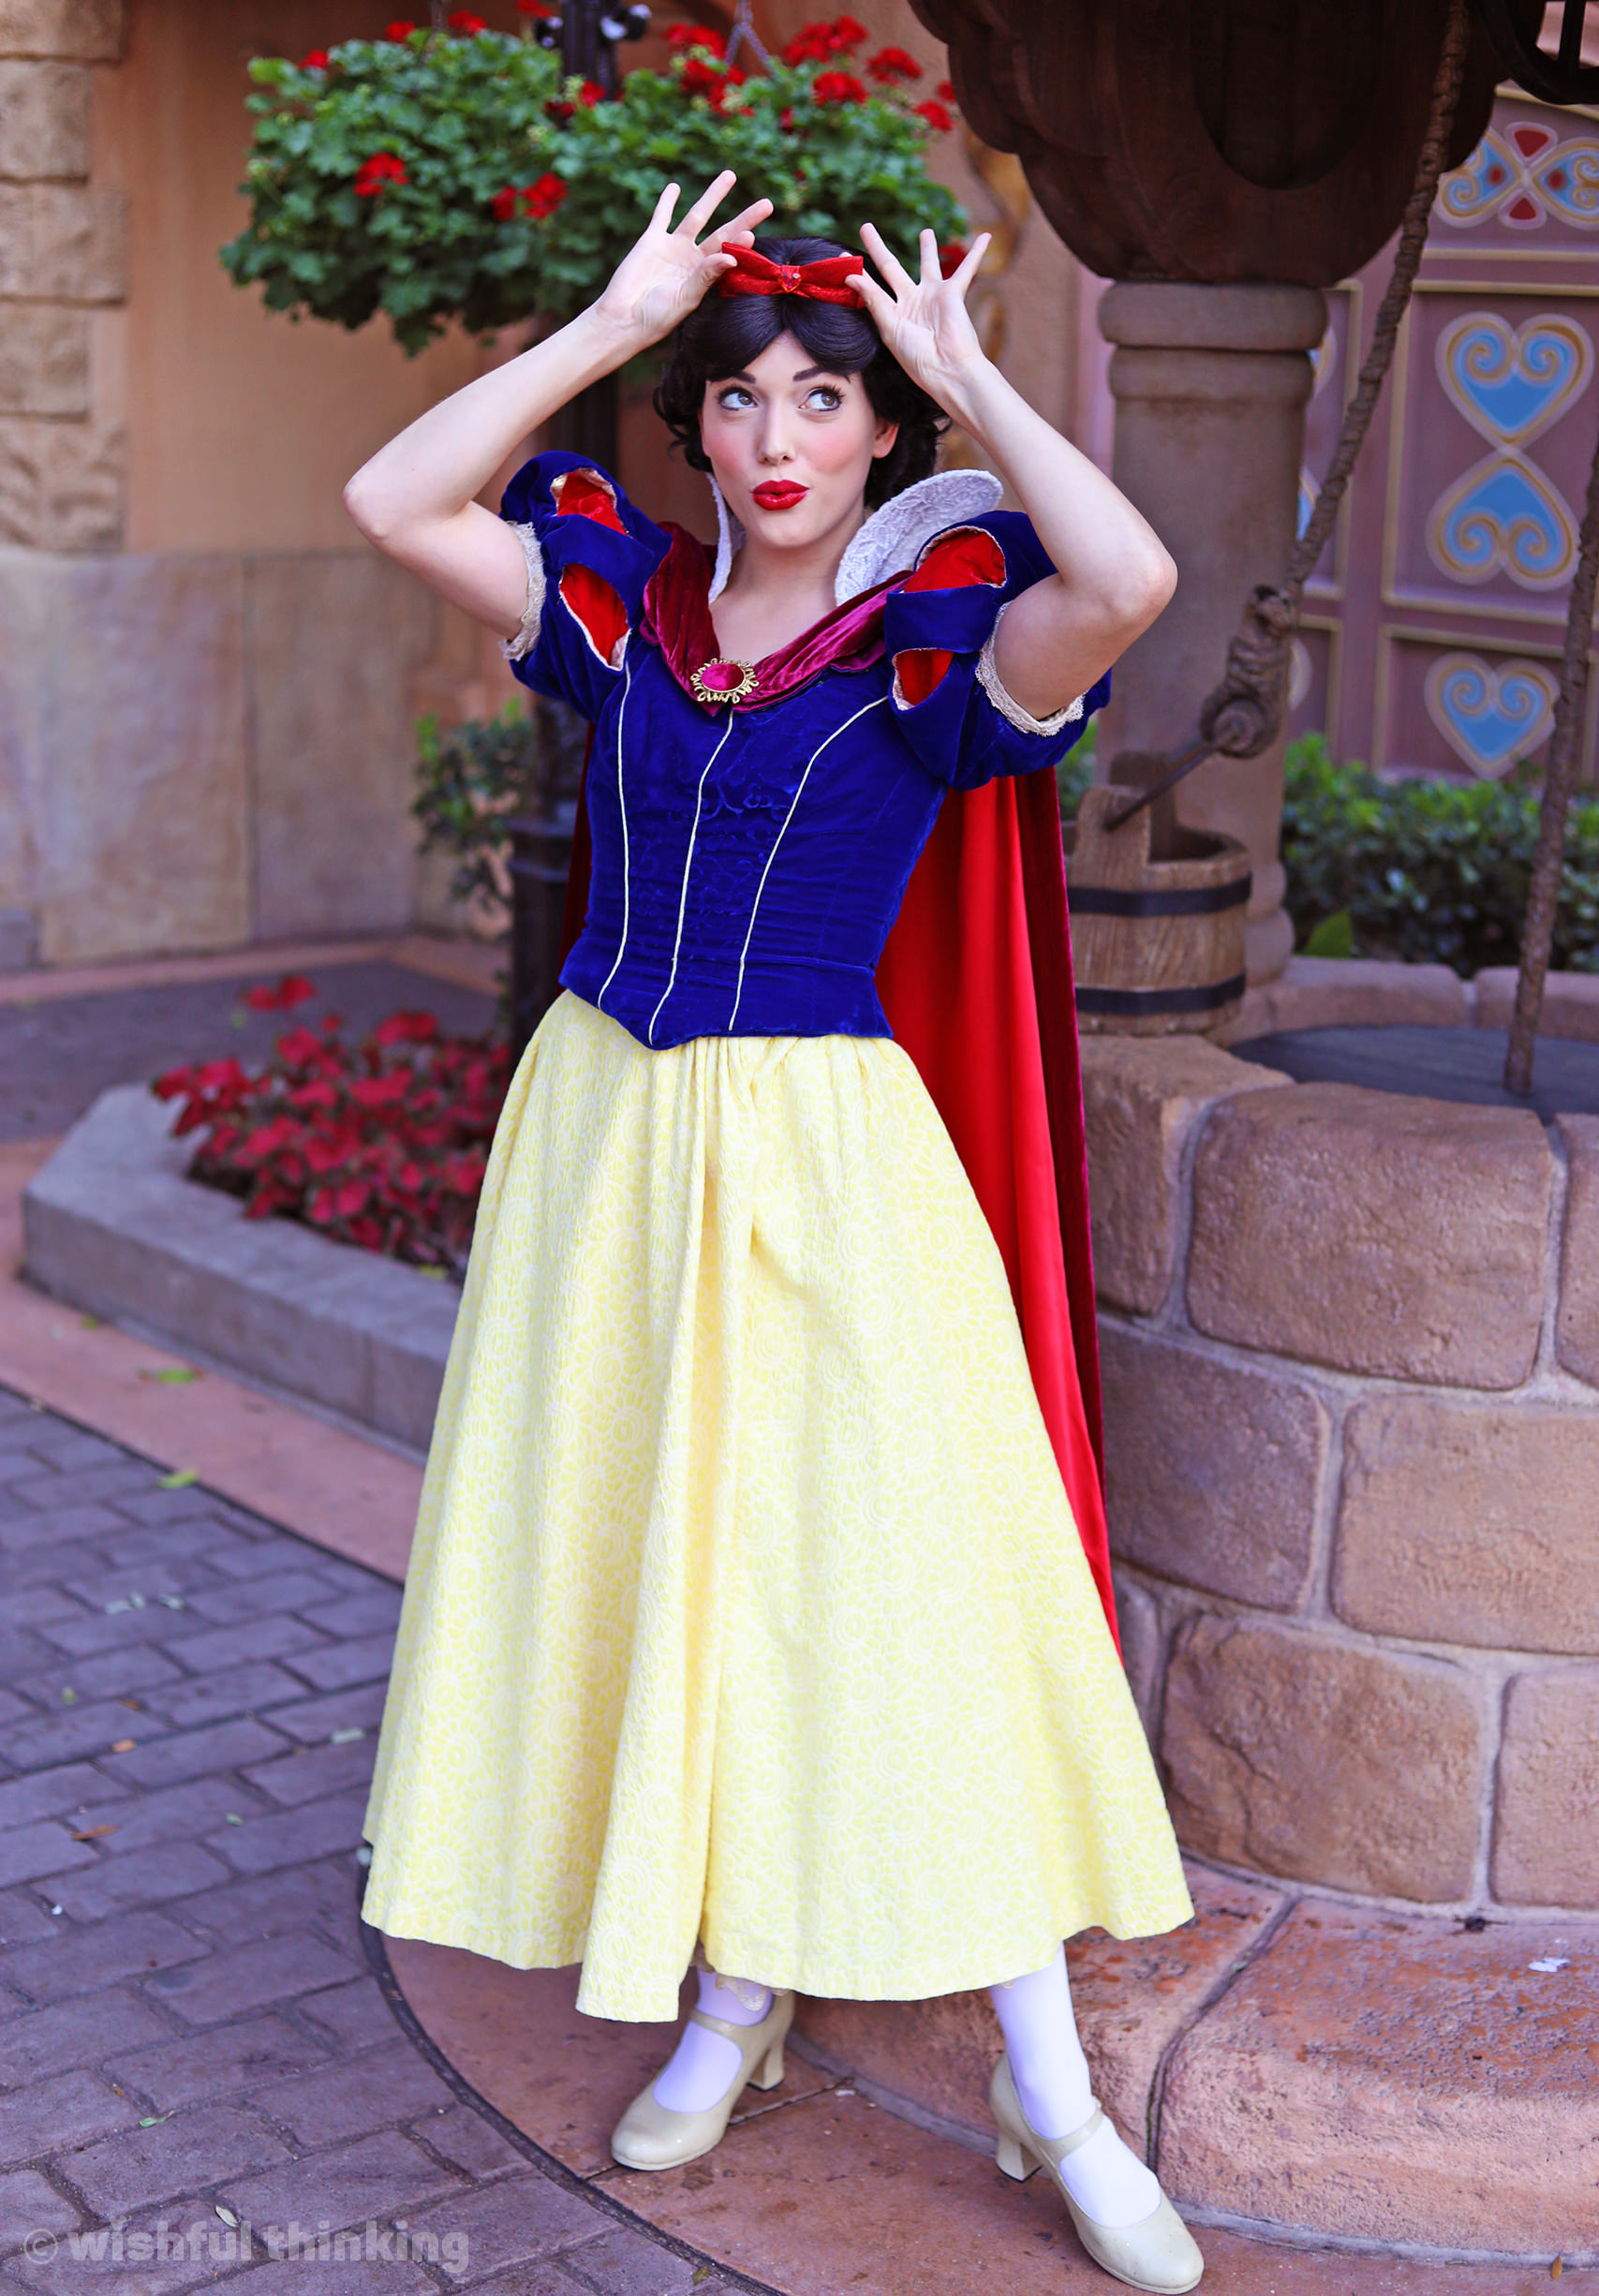 Snow White, looking lovely, shows off the bow in her hair within EPCOT's Germany Pavilion at Walt Disney World in Orlando, Florida